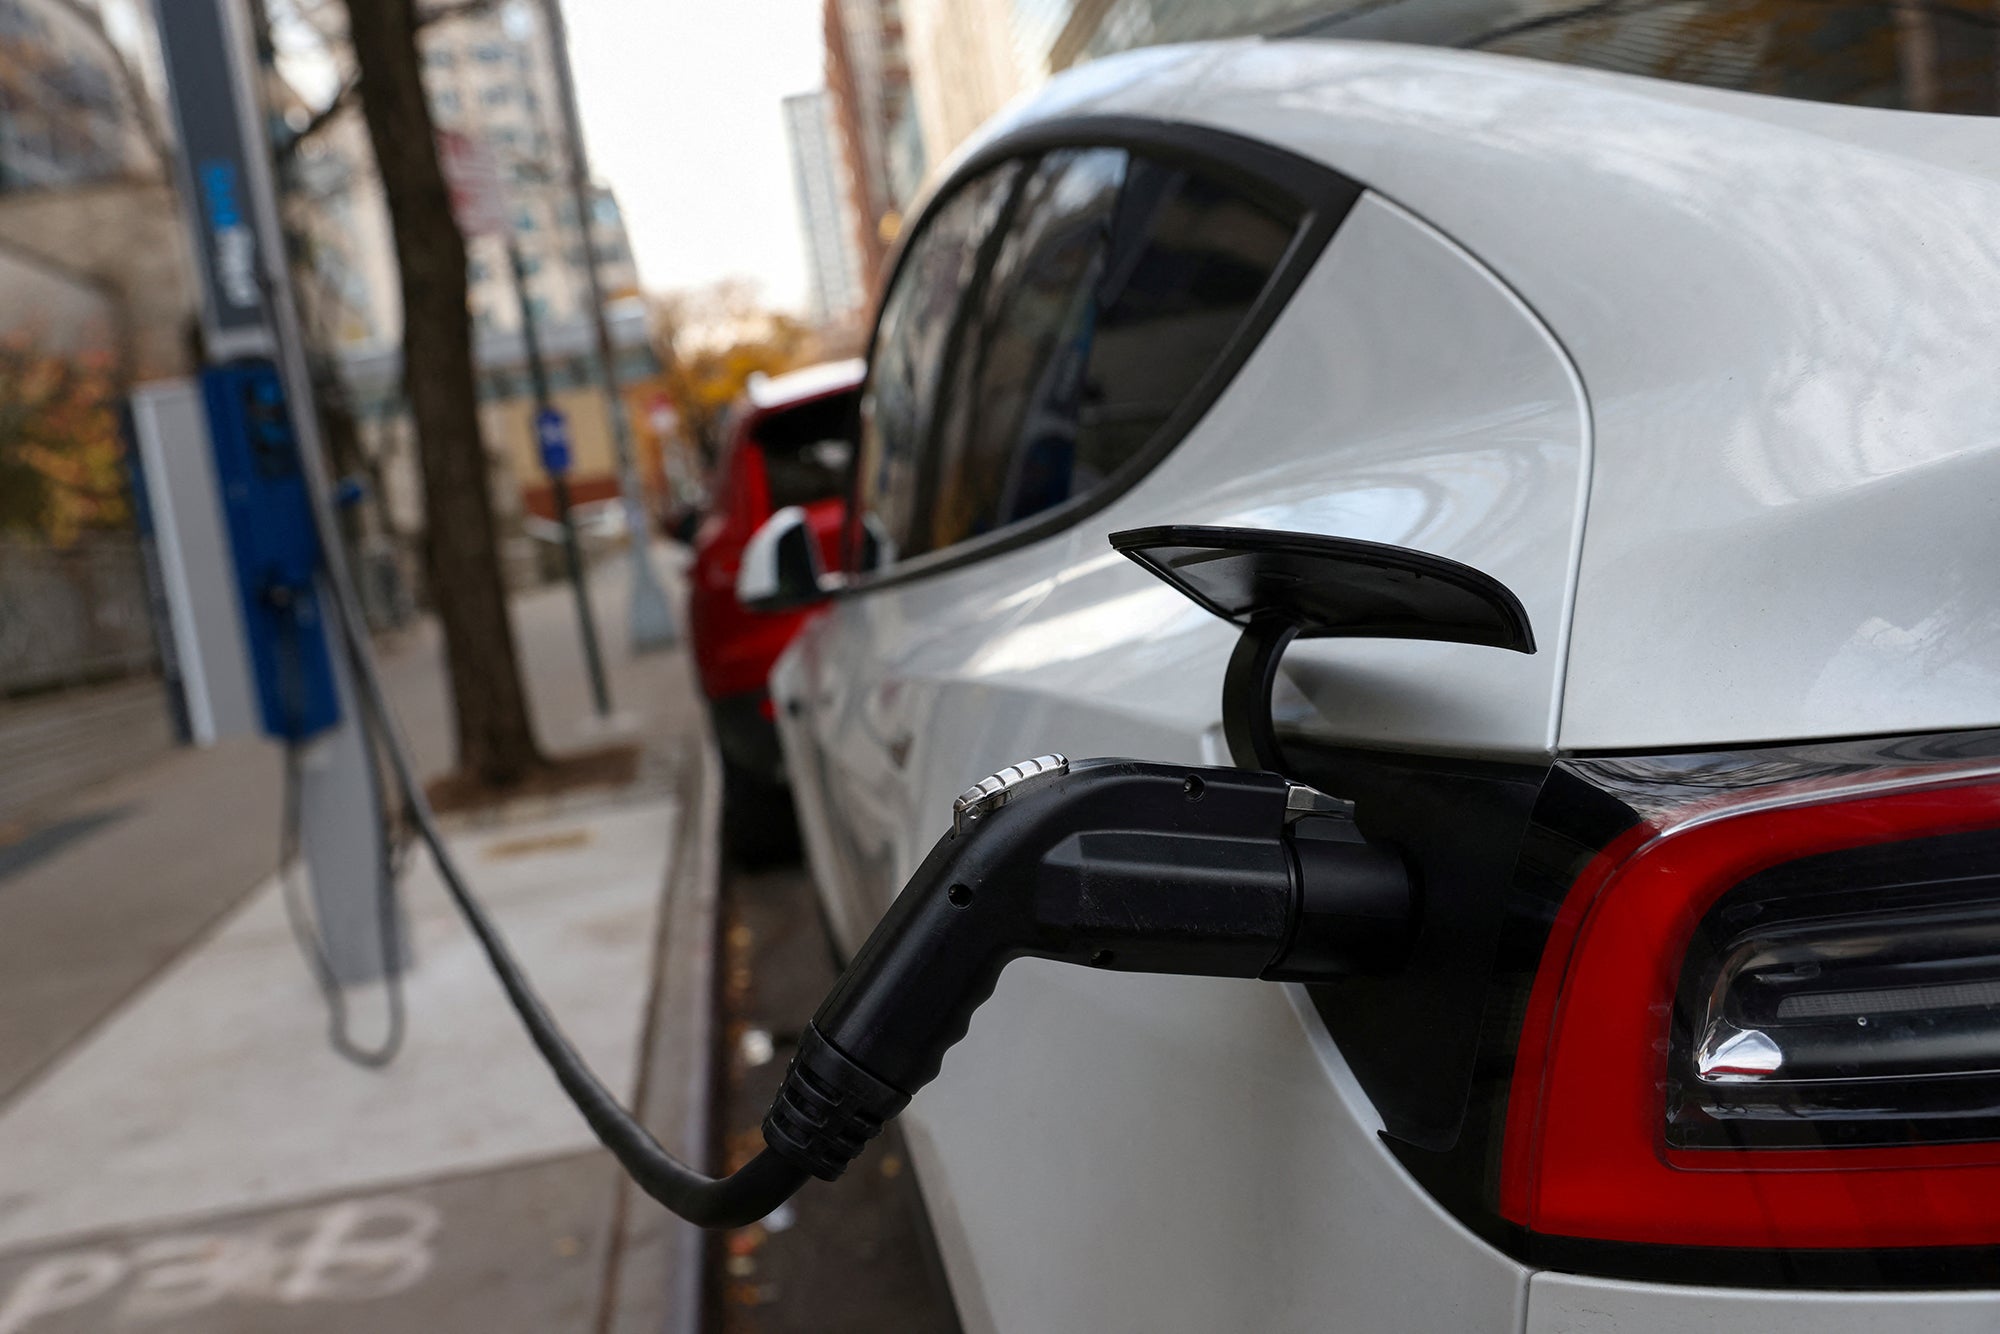 tax-credit-confusion-could-create-rush-for-electric-vehicles-in-early